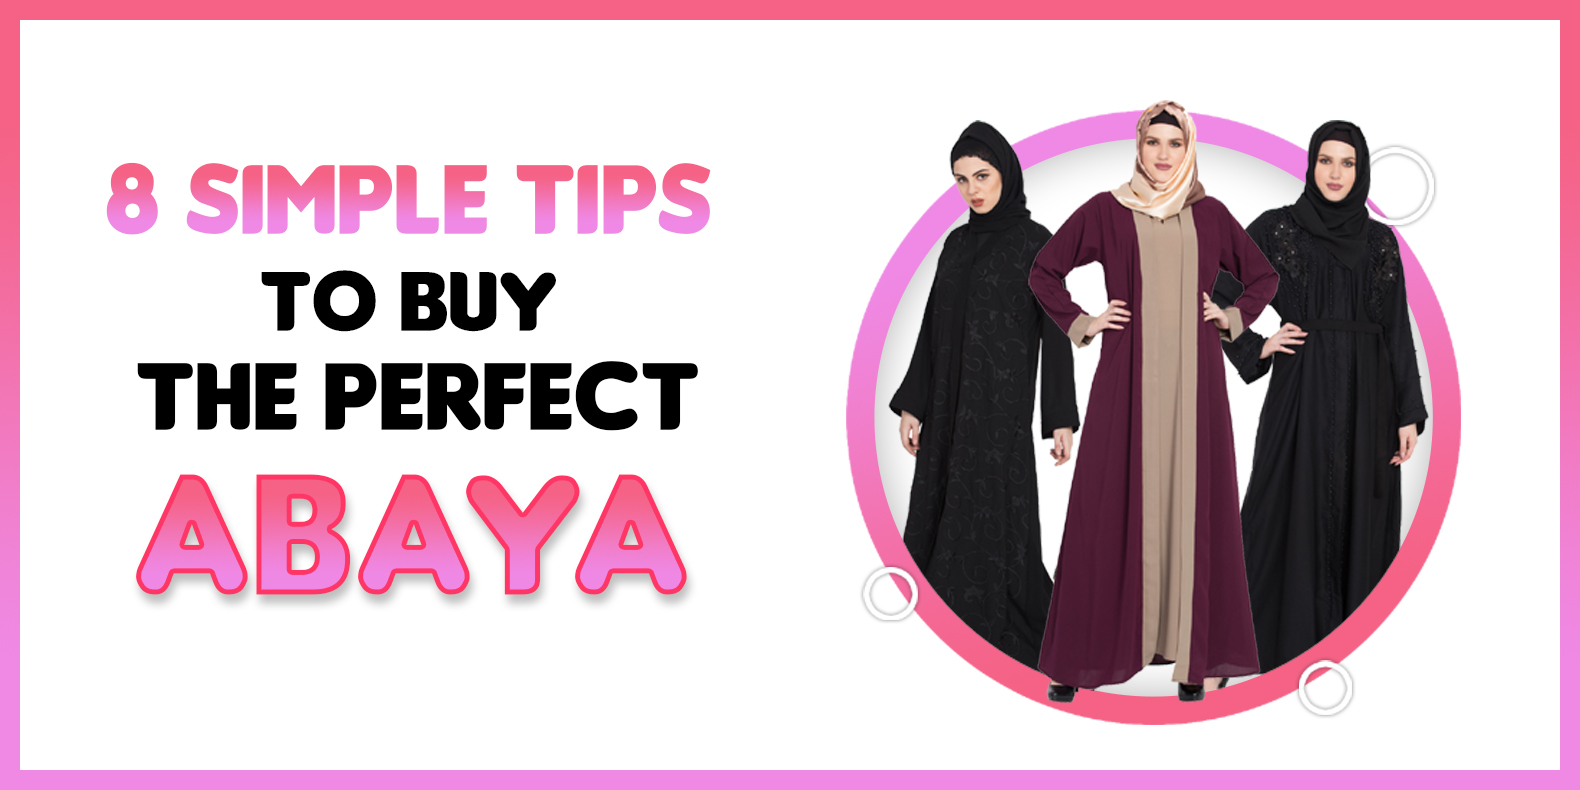 8 SIMPLE TIPS TO BUY THE PERFECT ABAYA :